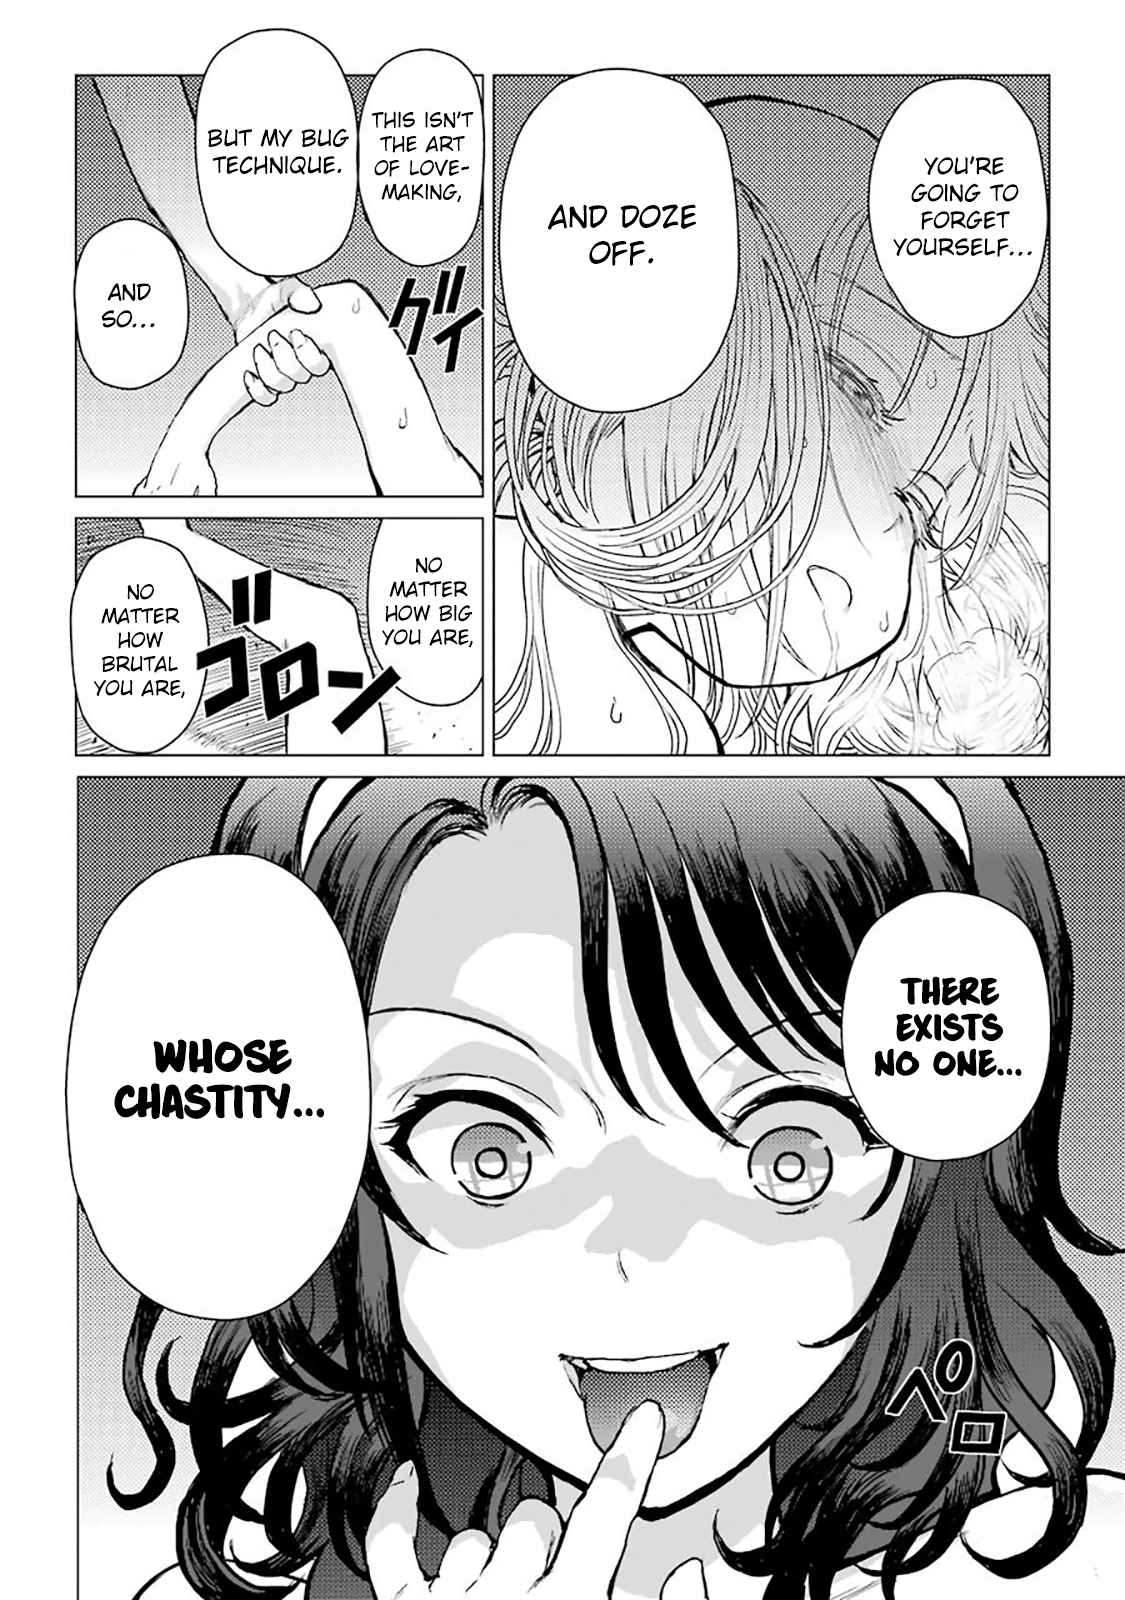 Caterpillar Vol. 8 Ch. 64 I'll Be Sullying Your Chastity ♥